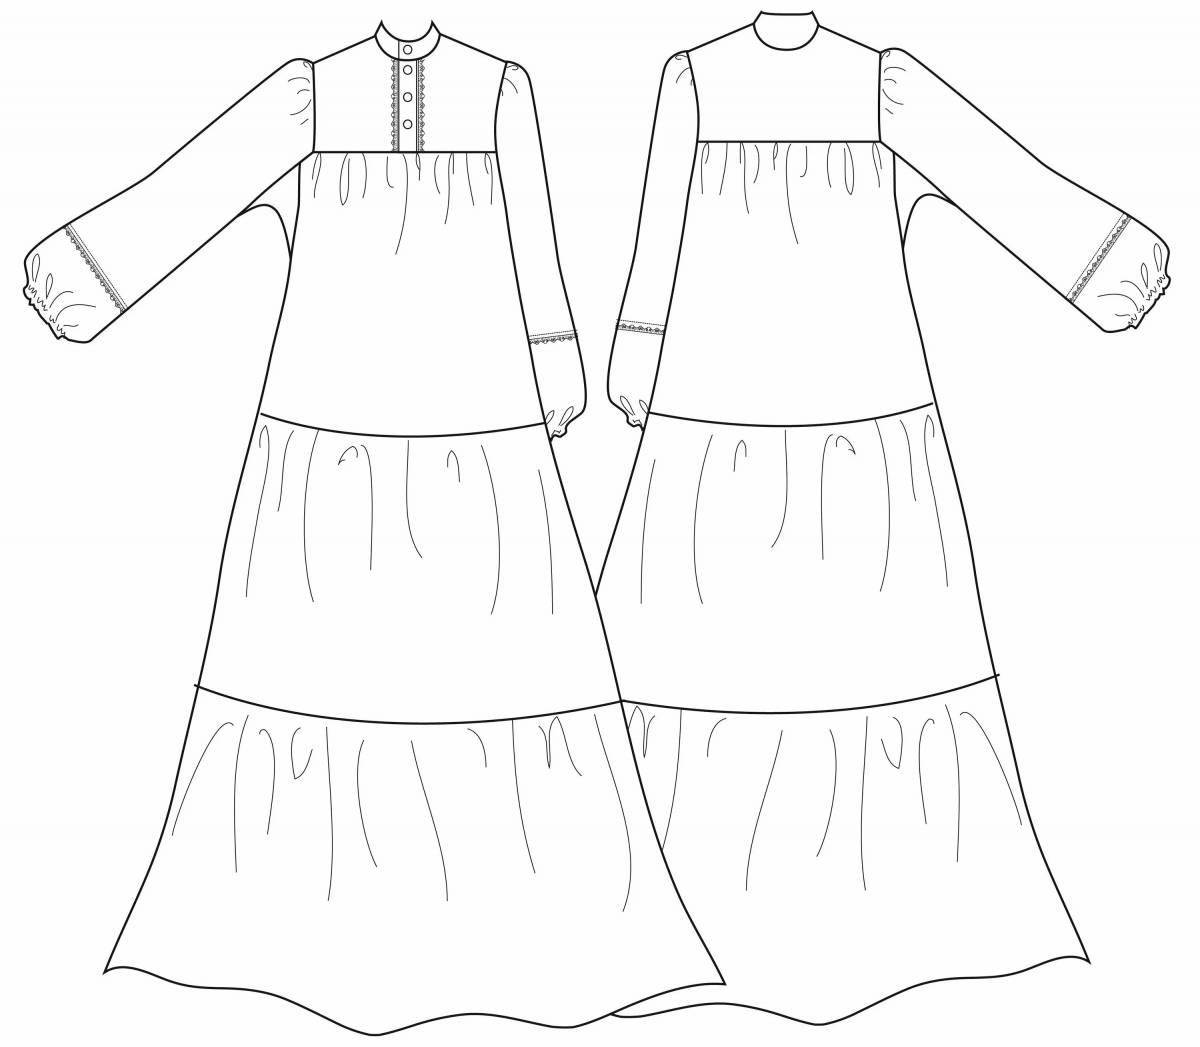 Coloring page luxurious Russian folk sundress